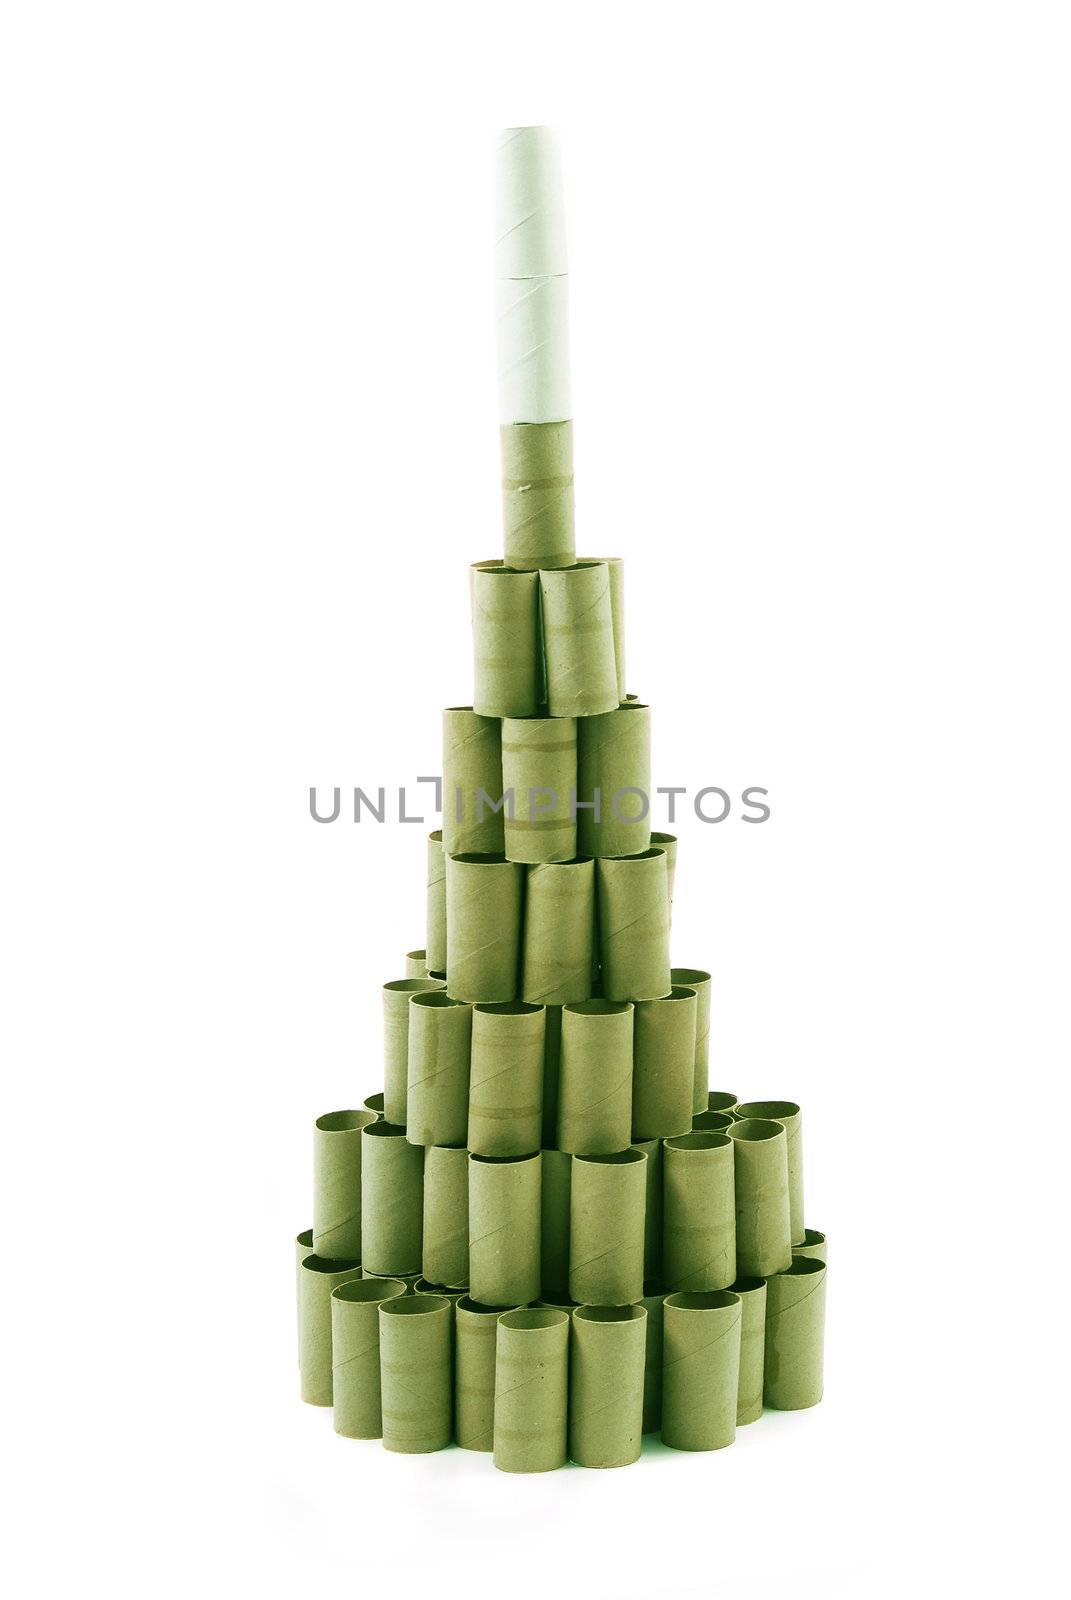 Christmas Tree made with cardboard rolls of toilet paper. Green tones. White background